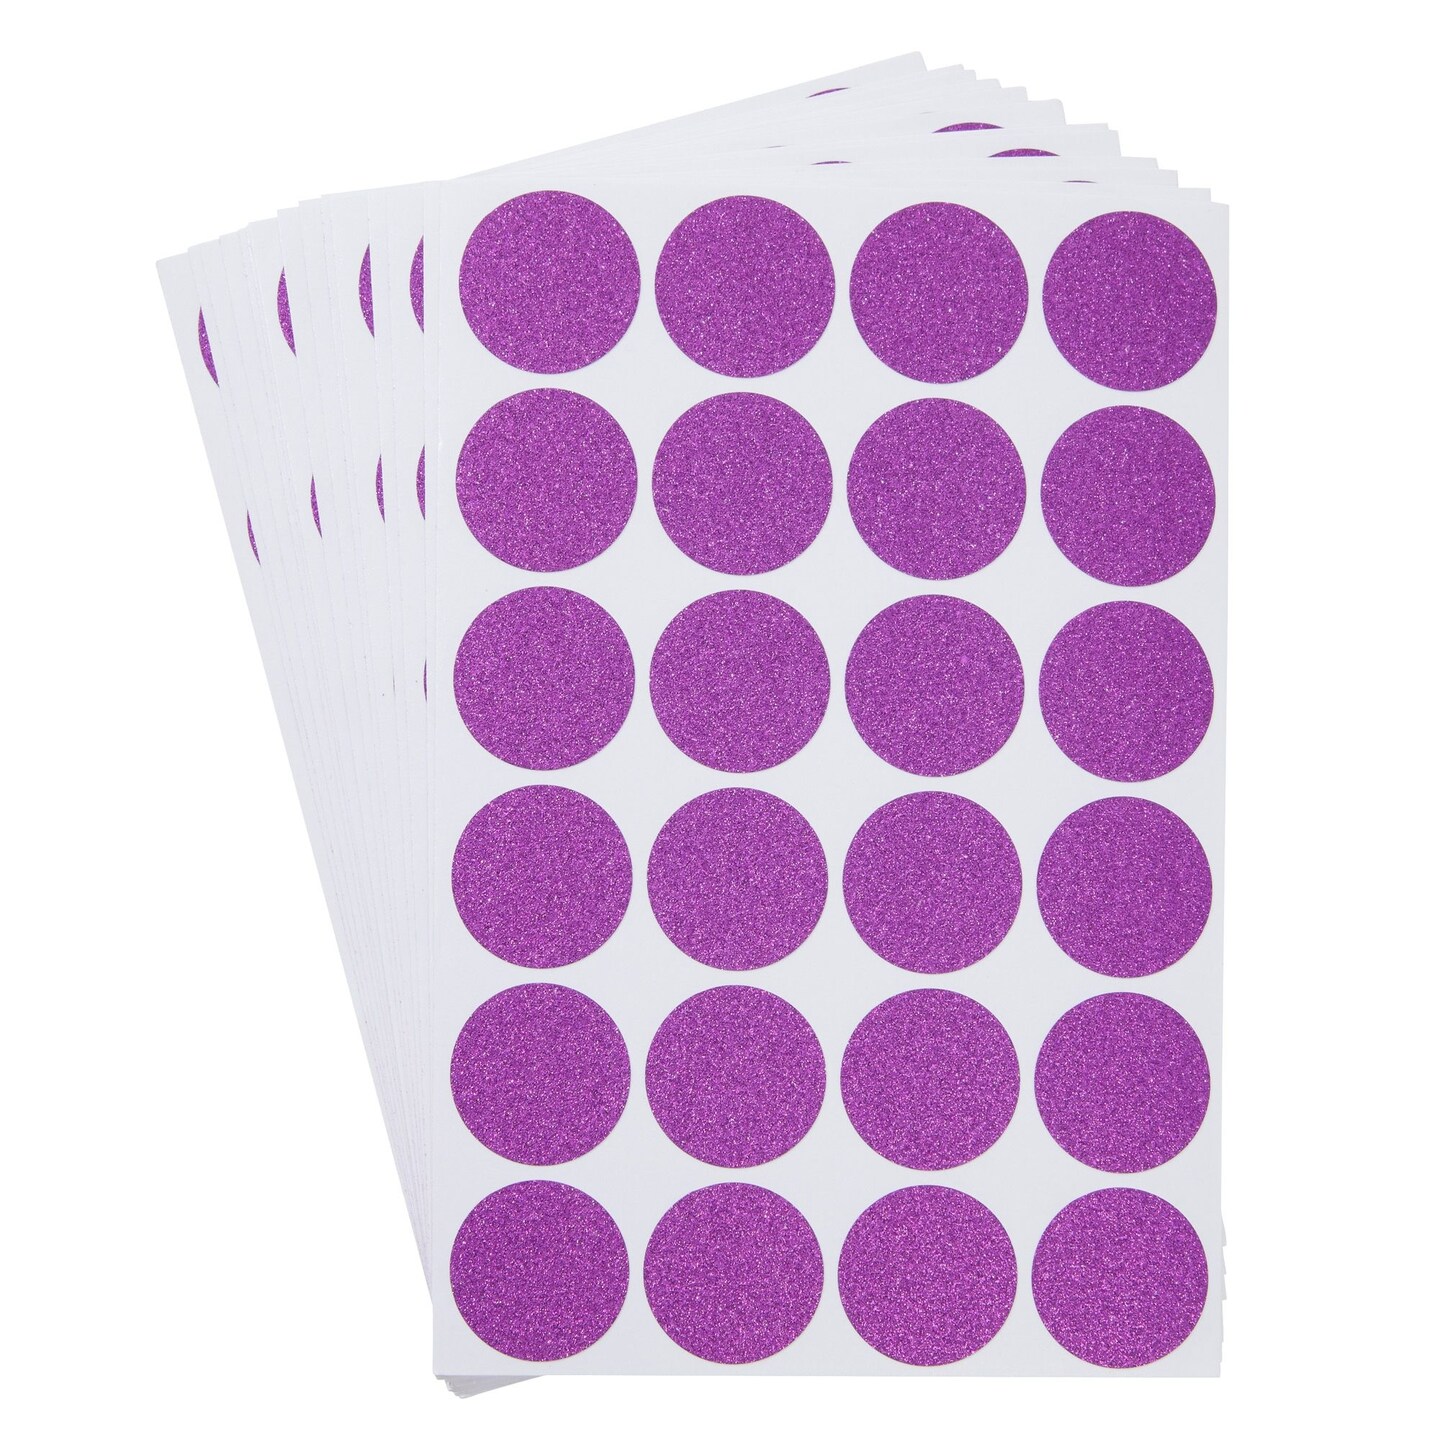 360-Pack 1-Inch Round Glitter Dots, Sparkle Stickers for Wedding, Birthday, and Graduation Invitations, Adhesive Envelope Seal Stickers, DIY Crafting Supplies (Purple)